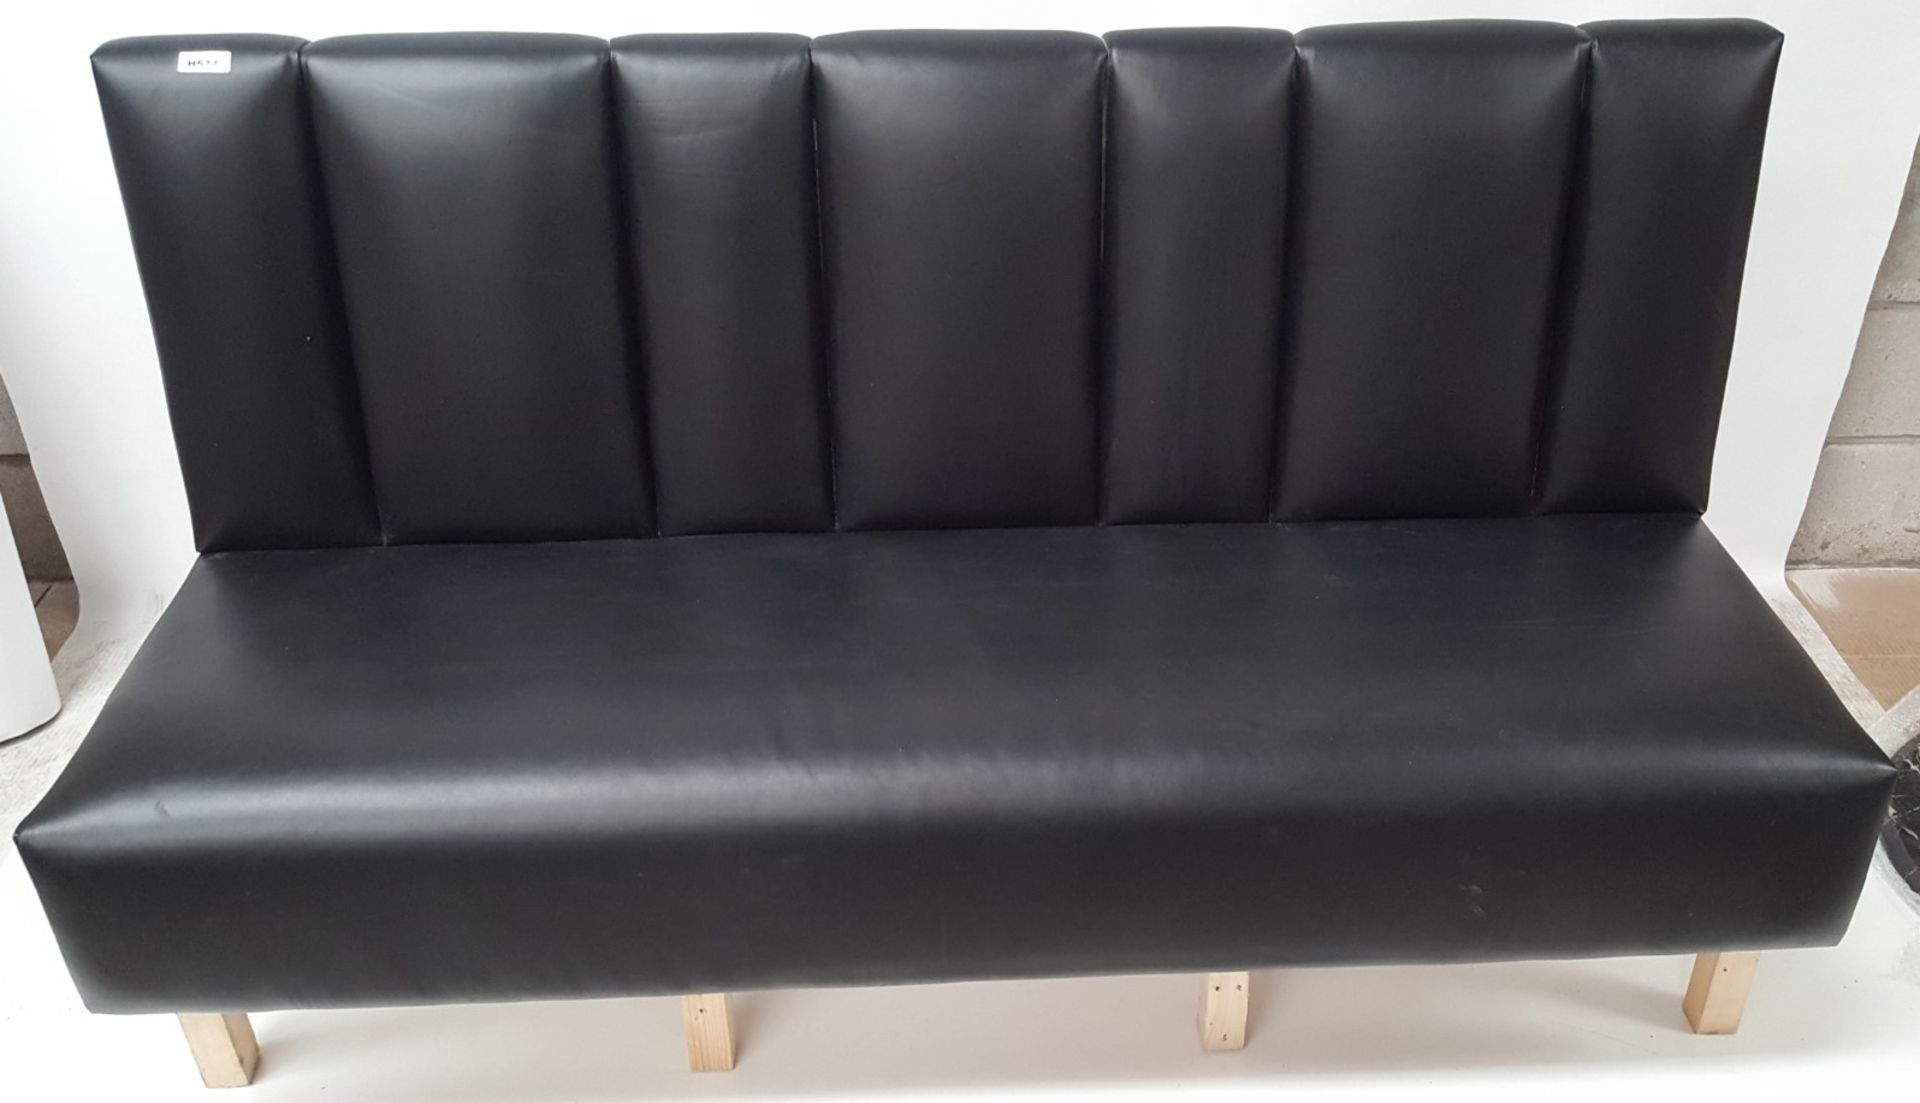 3 Pieces Of Black Upholstered Faux Leather Seating Booths - CL431 - Location: Altrincham WA14 - Image 2 of 19